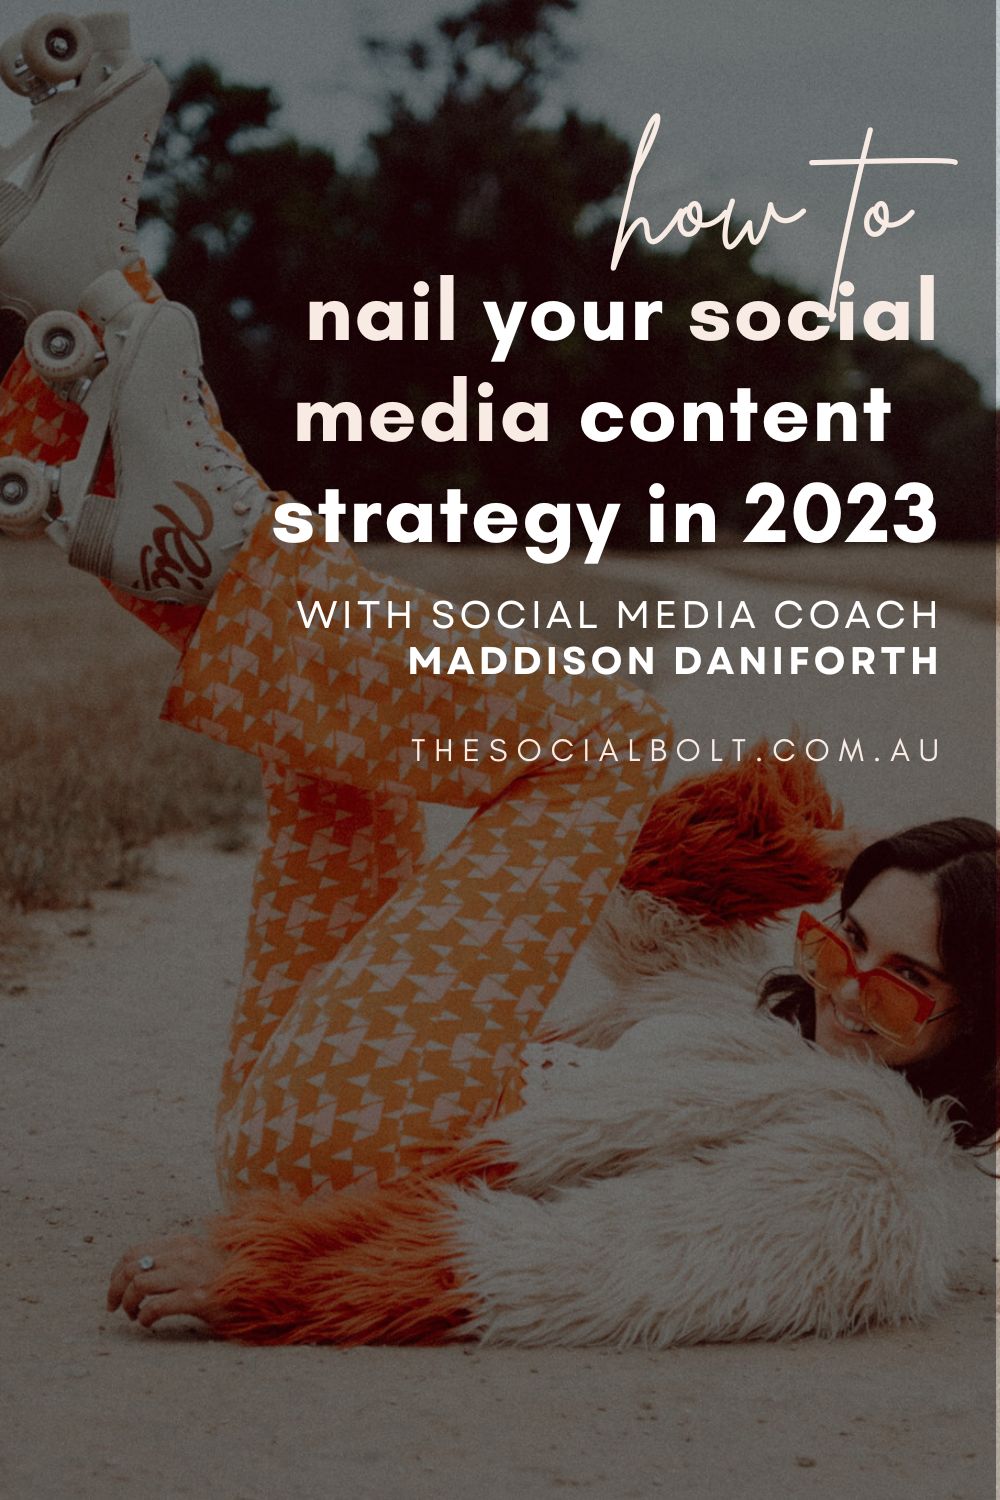 How to Nail Your Social Media Strategy in 2023 with Maddison Danforth